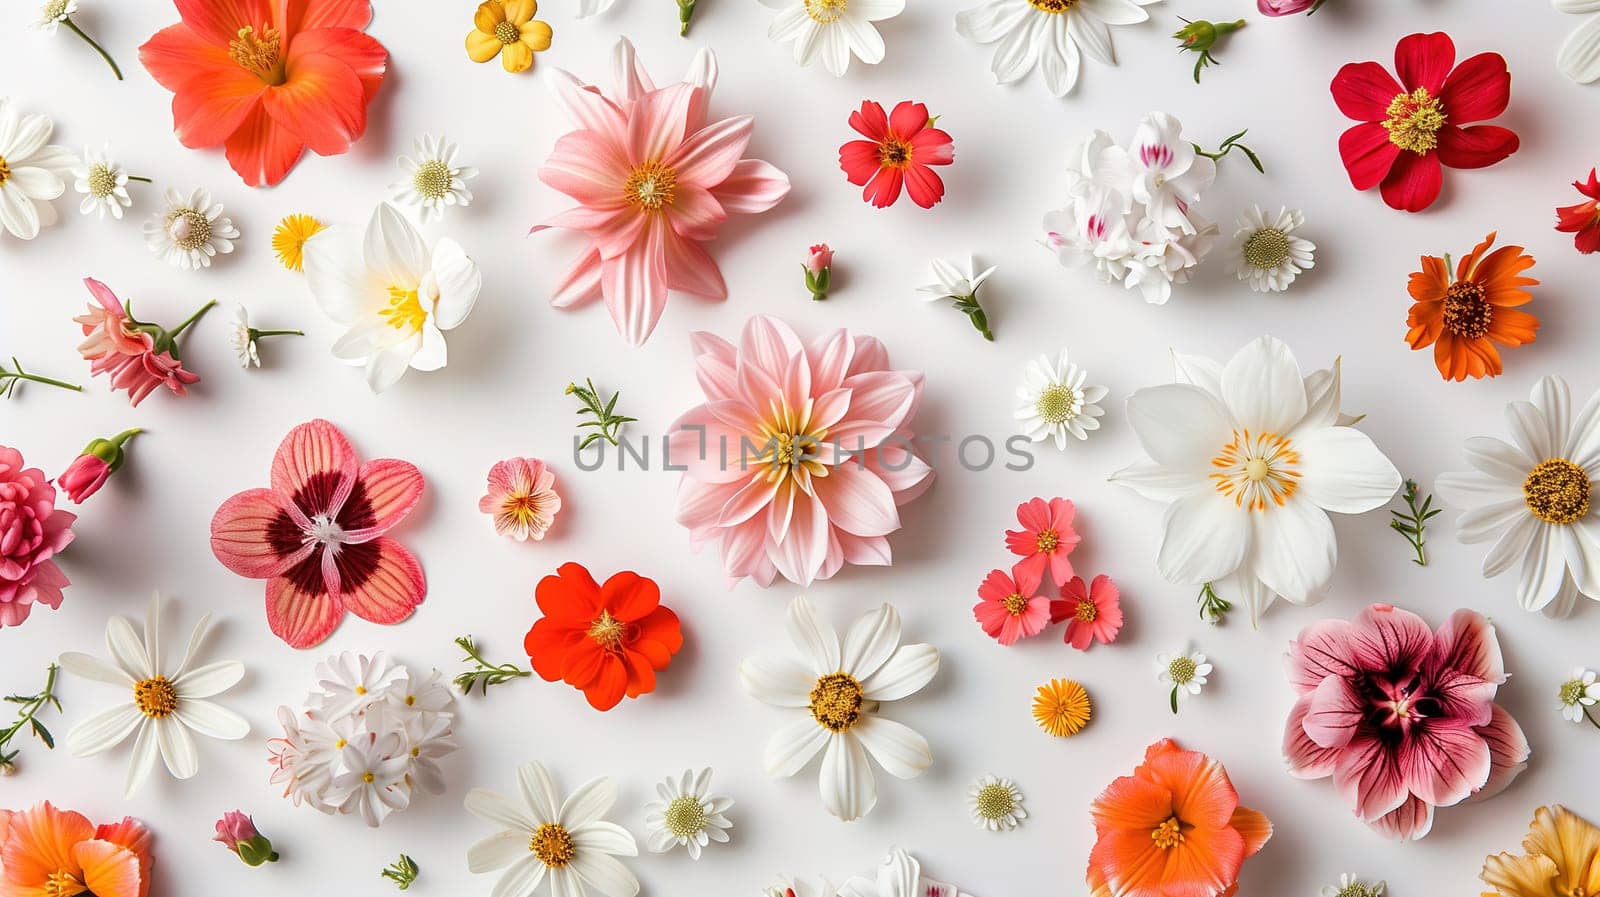 A variety of different colored flowers are spread out on a clean white surface. The flowers are vibrant and create a colorful display against the neutral backdrop.